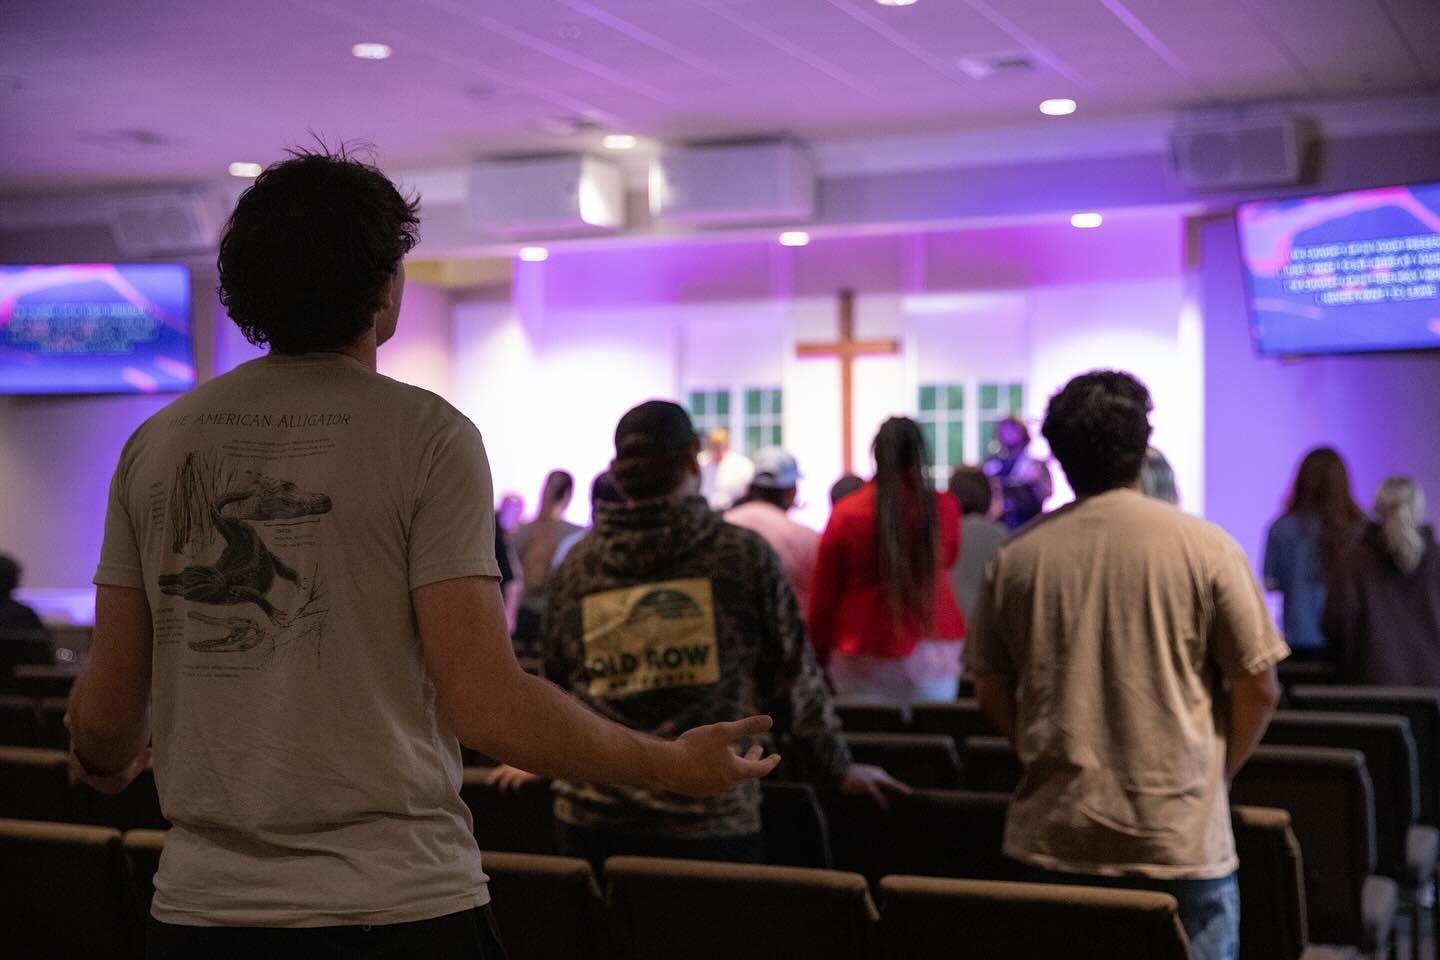 Worship and response time was so powerful last night! The Lord was so clear, and He made His presence known! As this week goes on, YA, we want you to stand firm in your faith, knowing that God is PRESENT! We can encounter the Lord whether we are in a